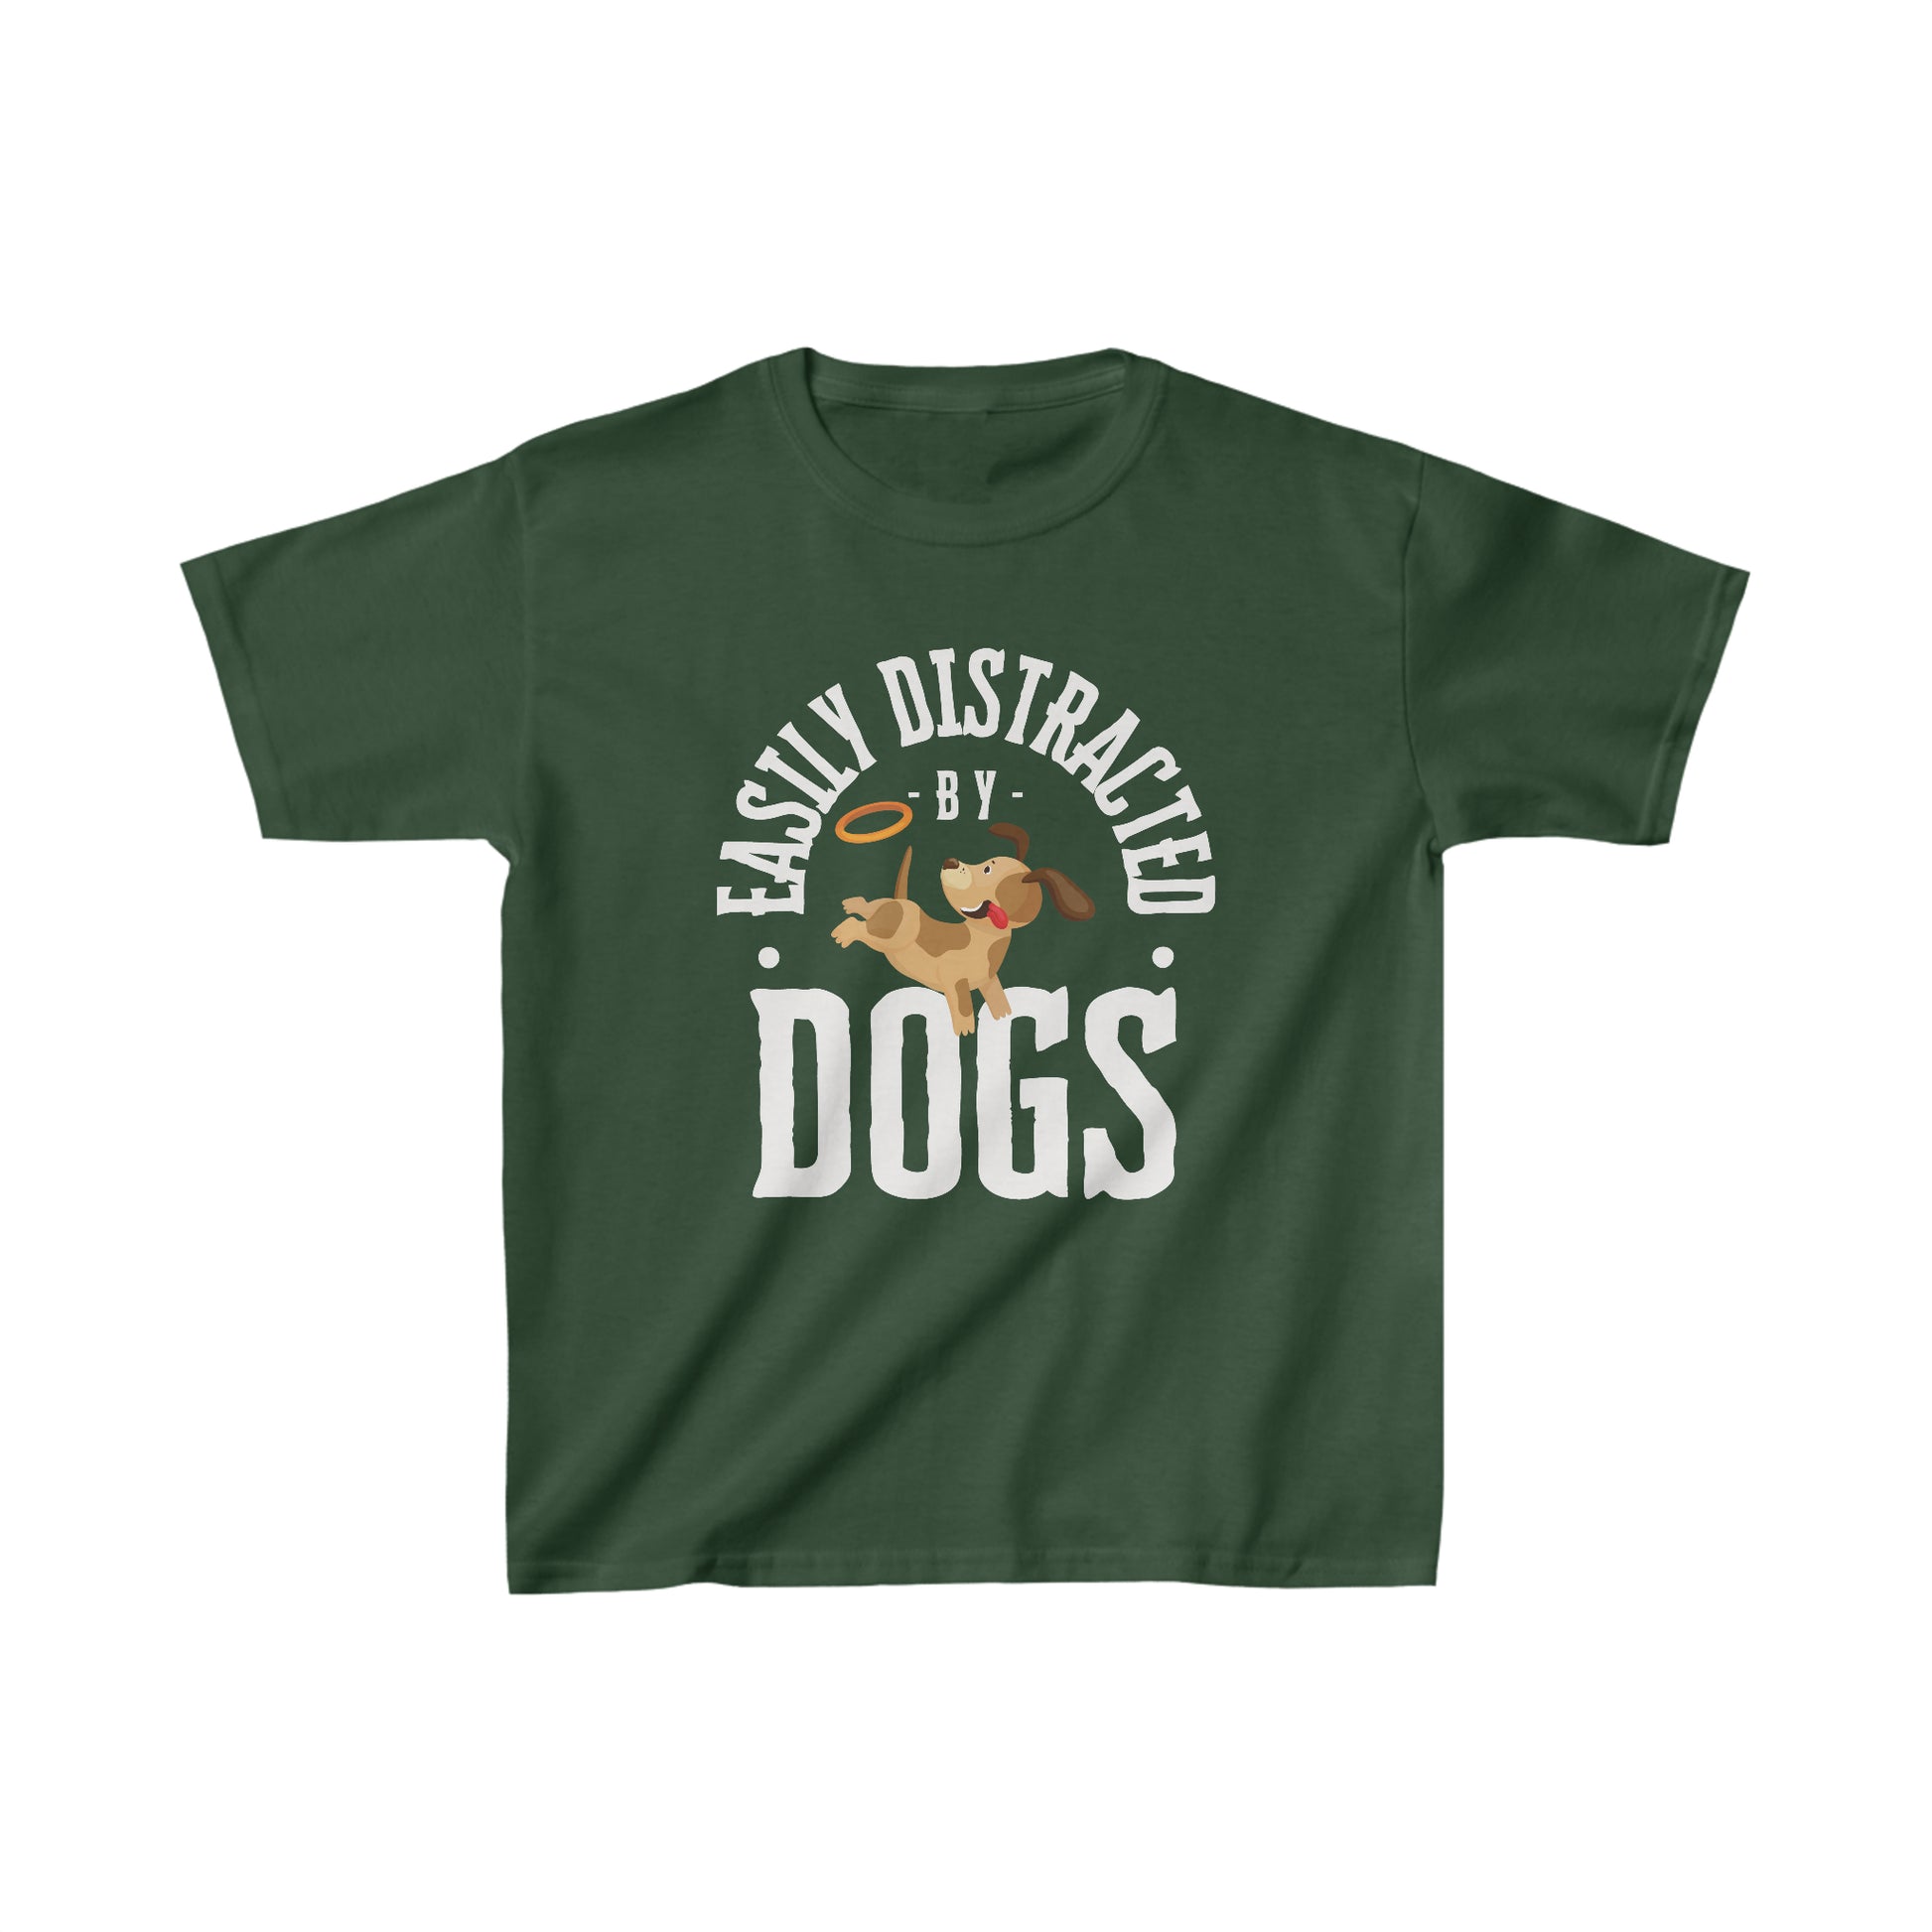 A Dogs Pure Love forest green unisex kids tee features a cute graphic and the slogan 'Easily Distracted by Dogs,' against a white canvas.